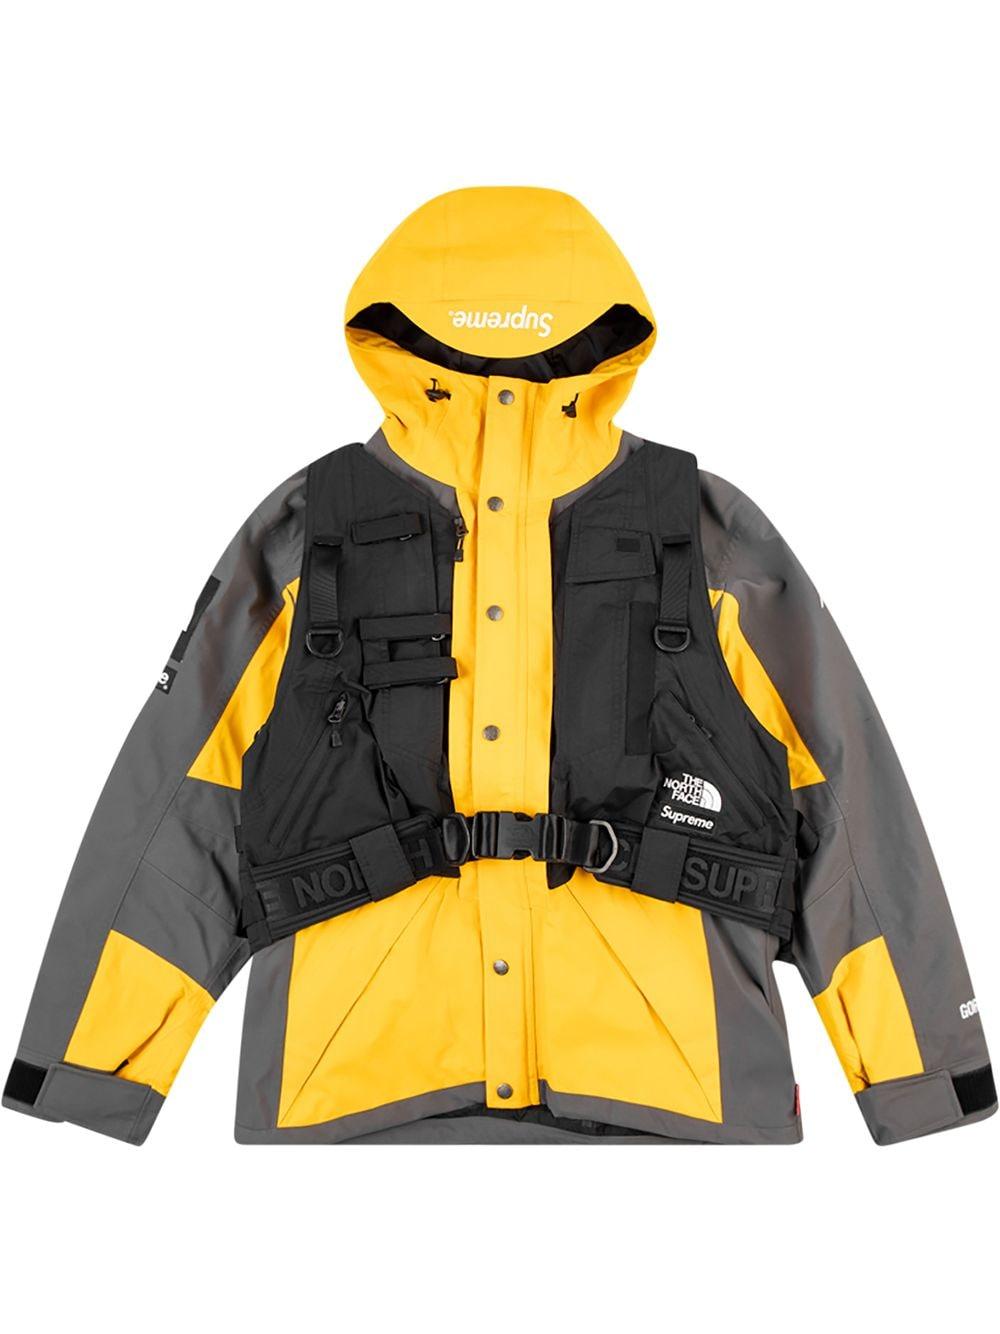 Supreme X The North Face Rtg Vest-detail Jacket in Yellow for Men 